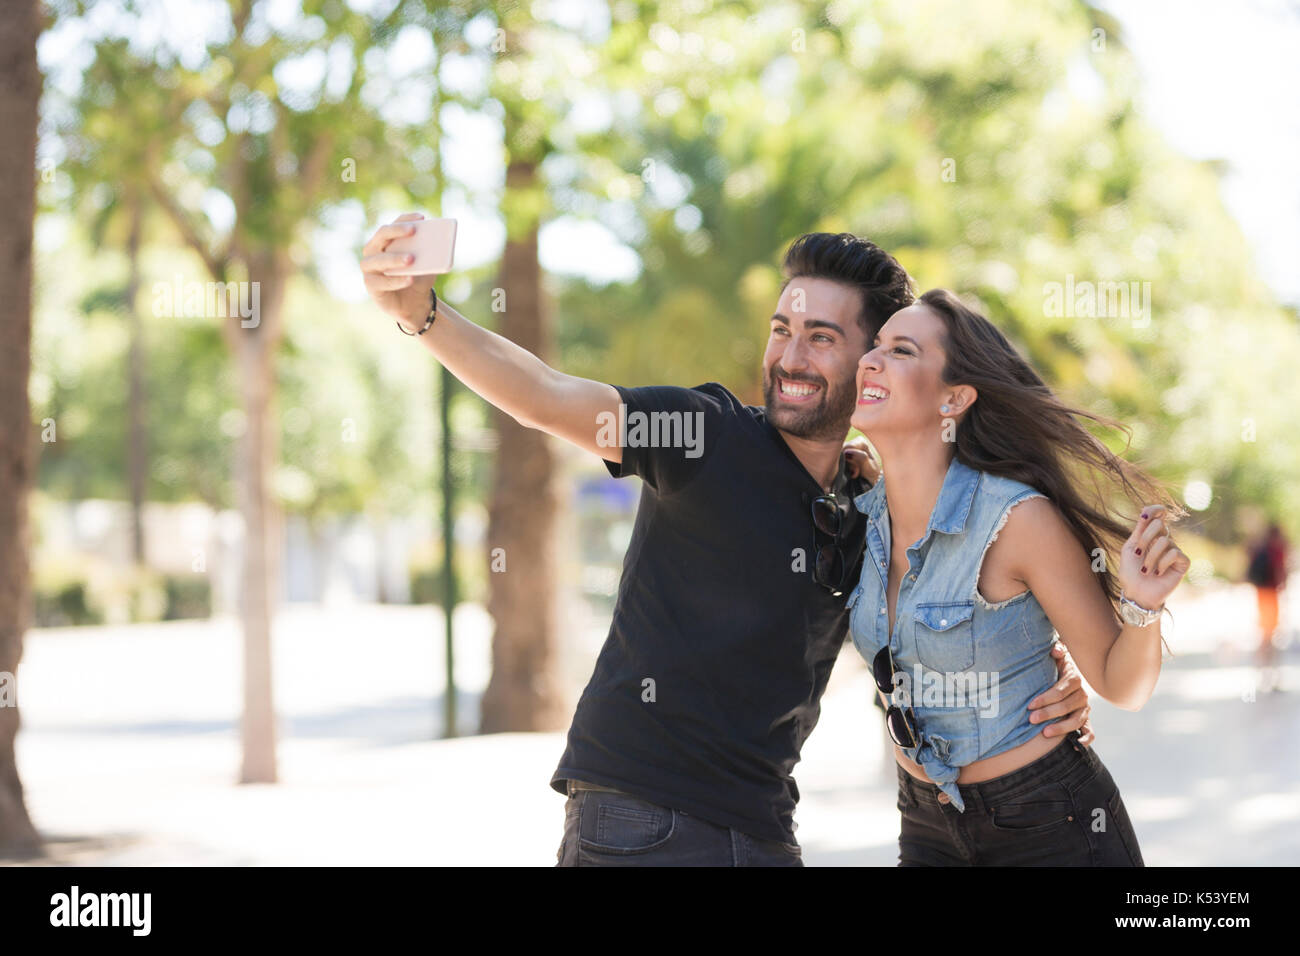 101+ Cute Couple Selfies Ideas and Poses | Ultra Updates